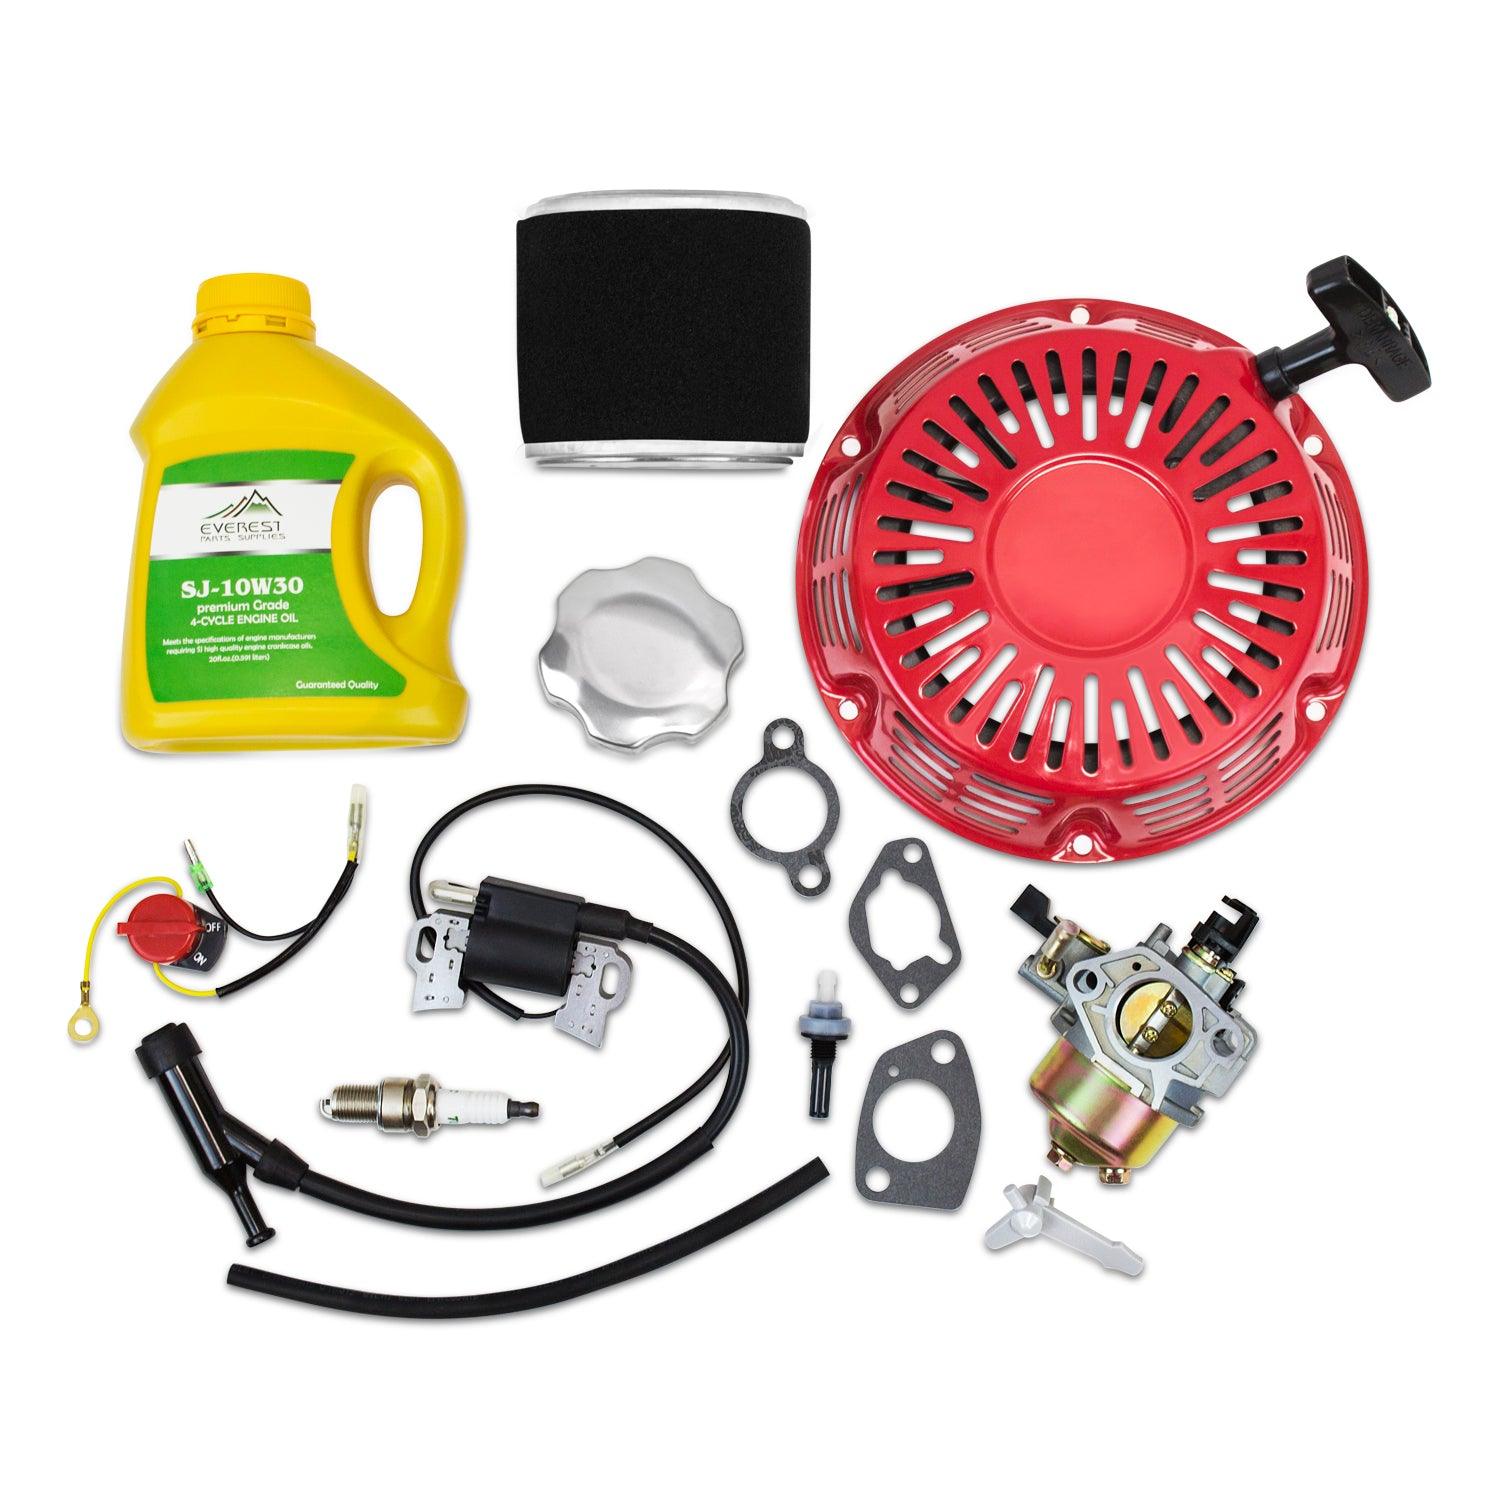 Tune up Kit fits Honda GX340, GX390 with Carburetor, Recoil, Ignition Coil, Spark Plug, Air Filter-1